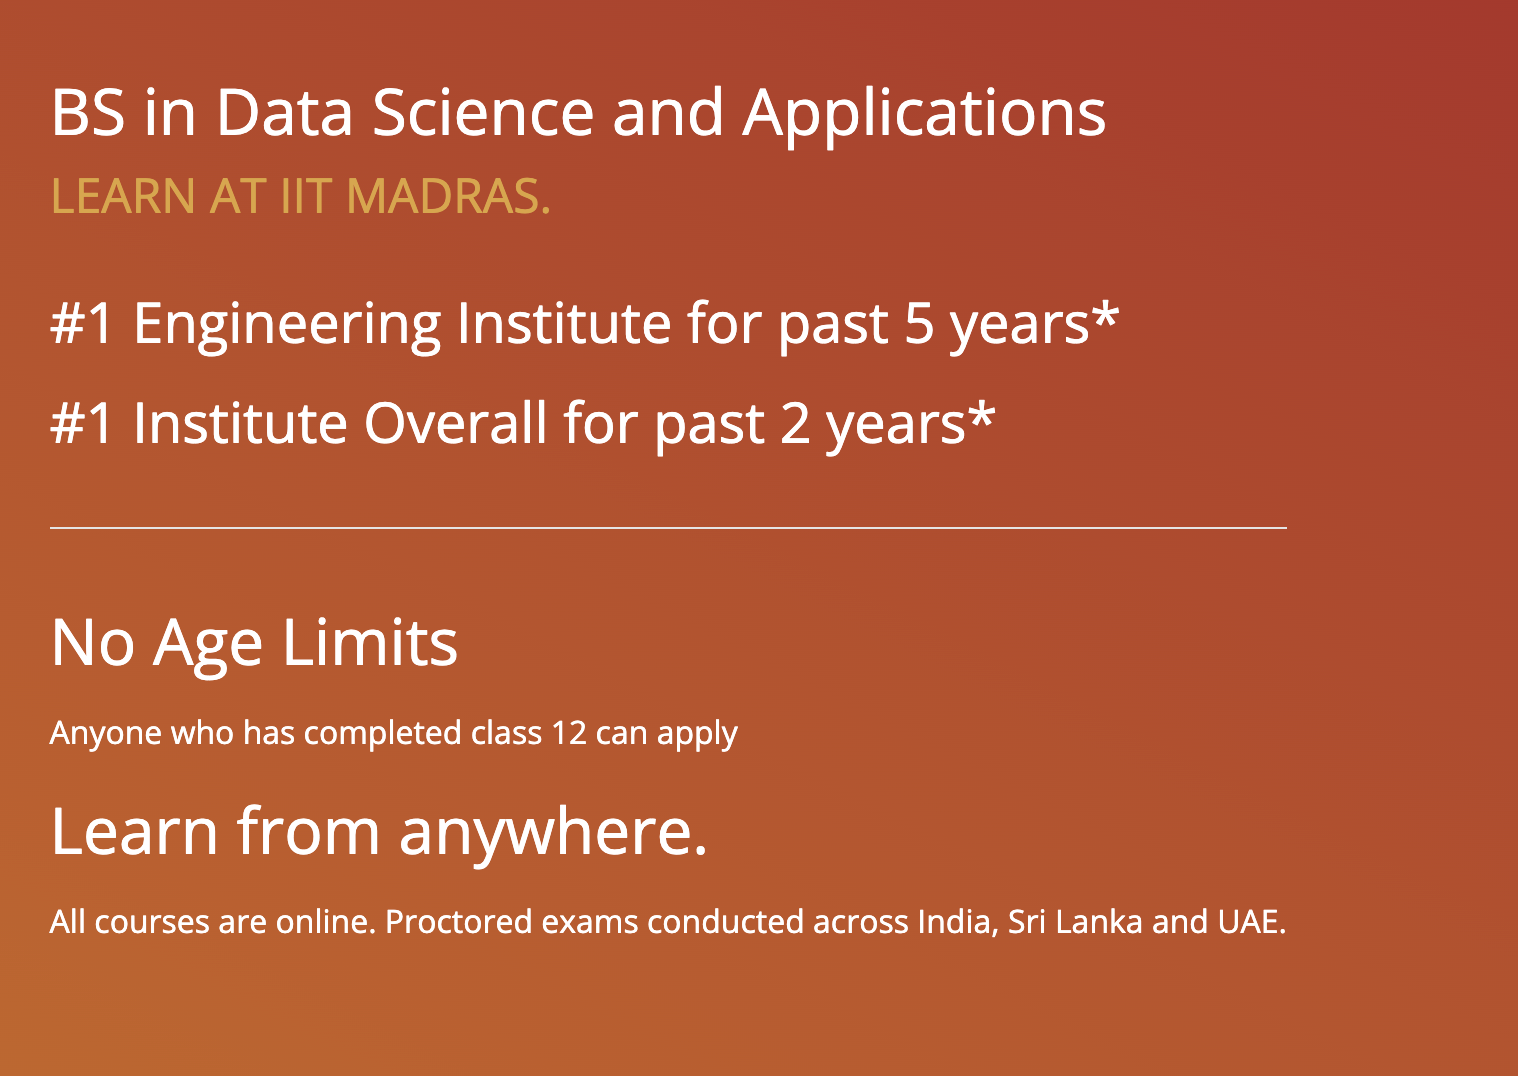 BS in Data Science from IIT Madras